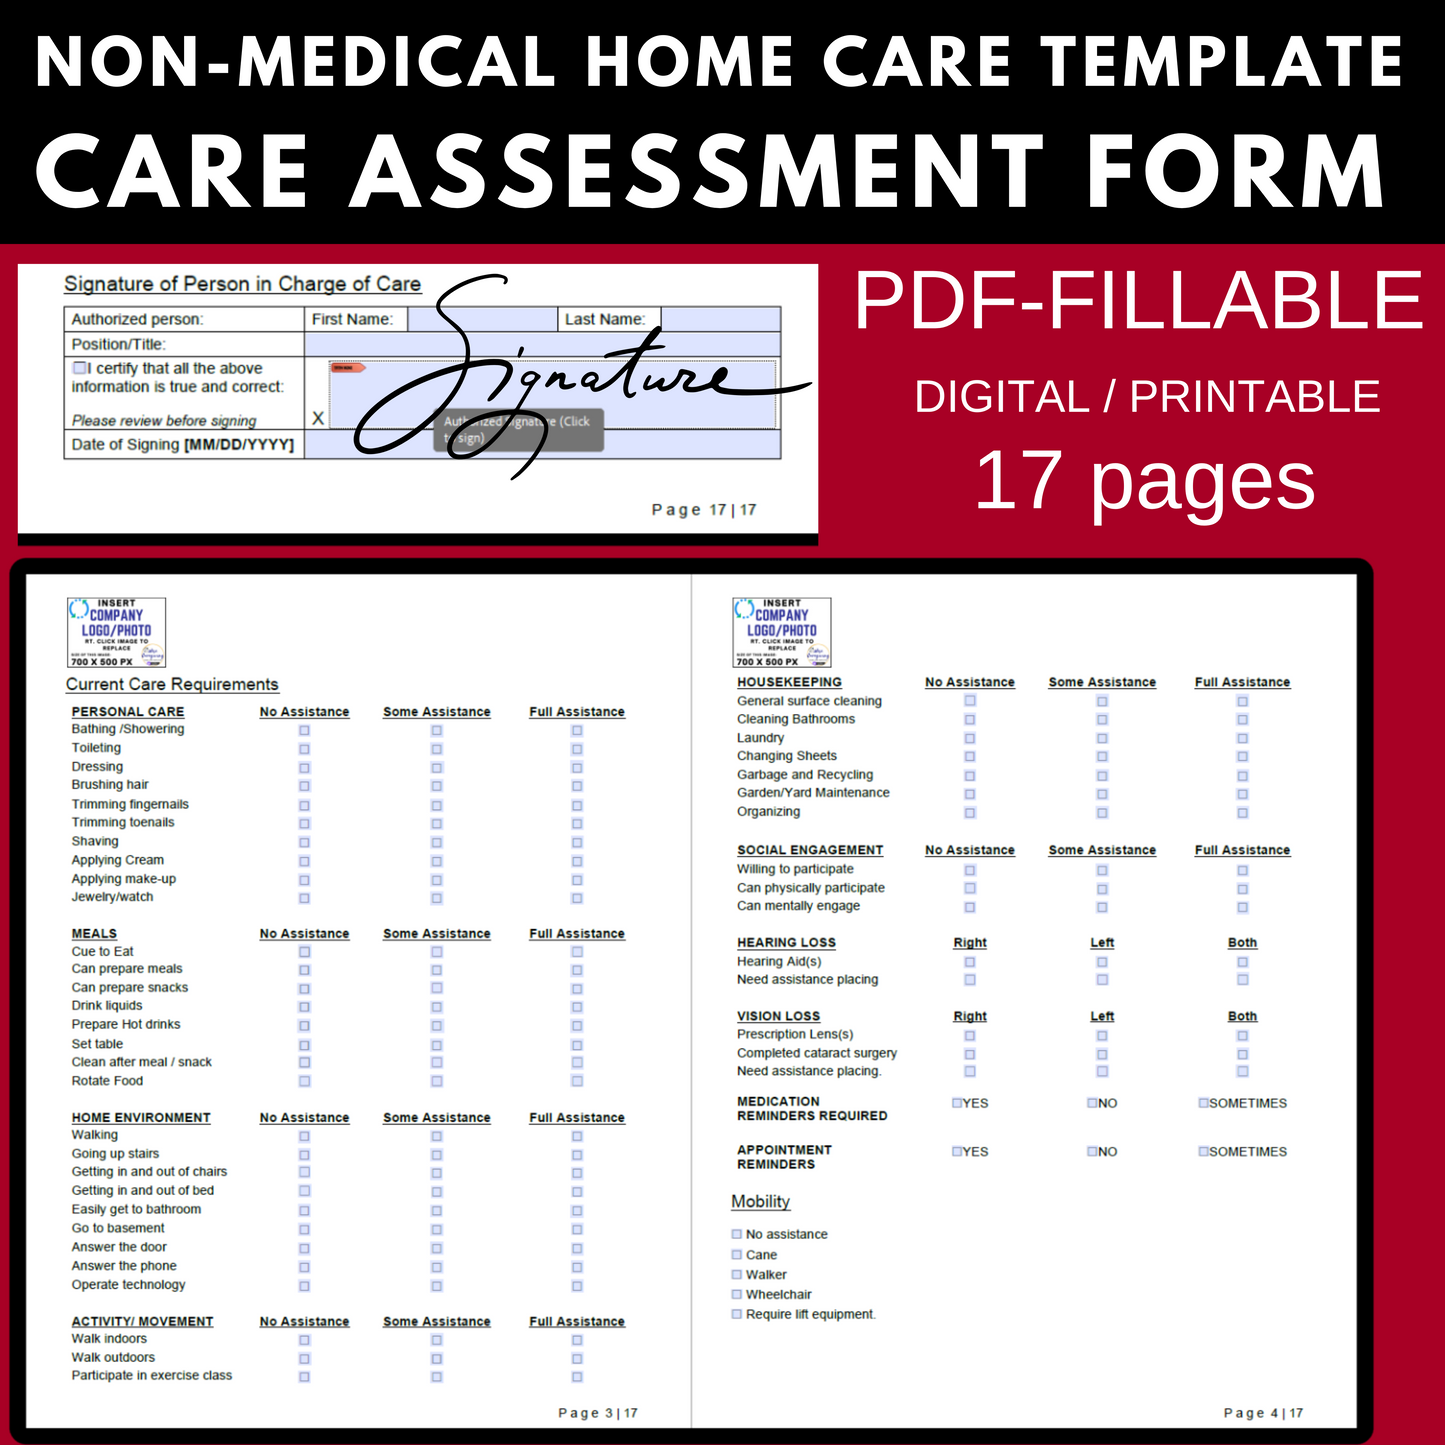 Home Care Assessment Fillable Form Template (NON-MEDICAL)